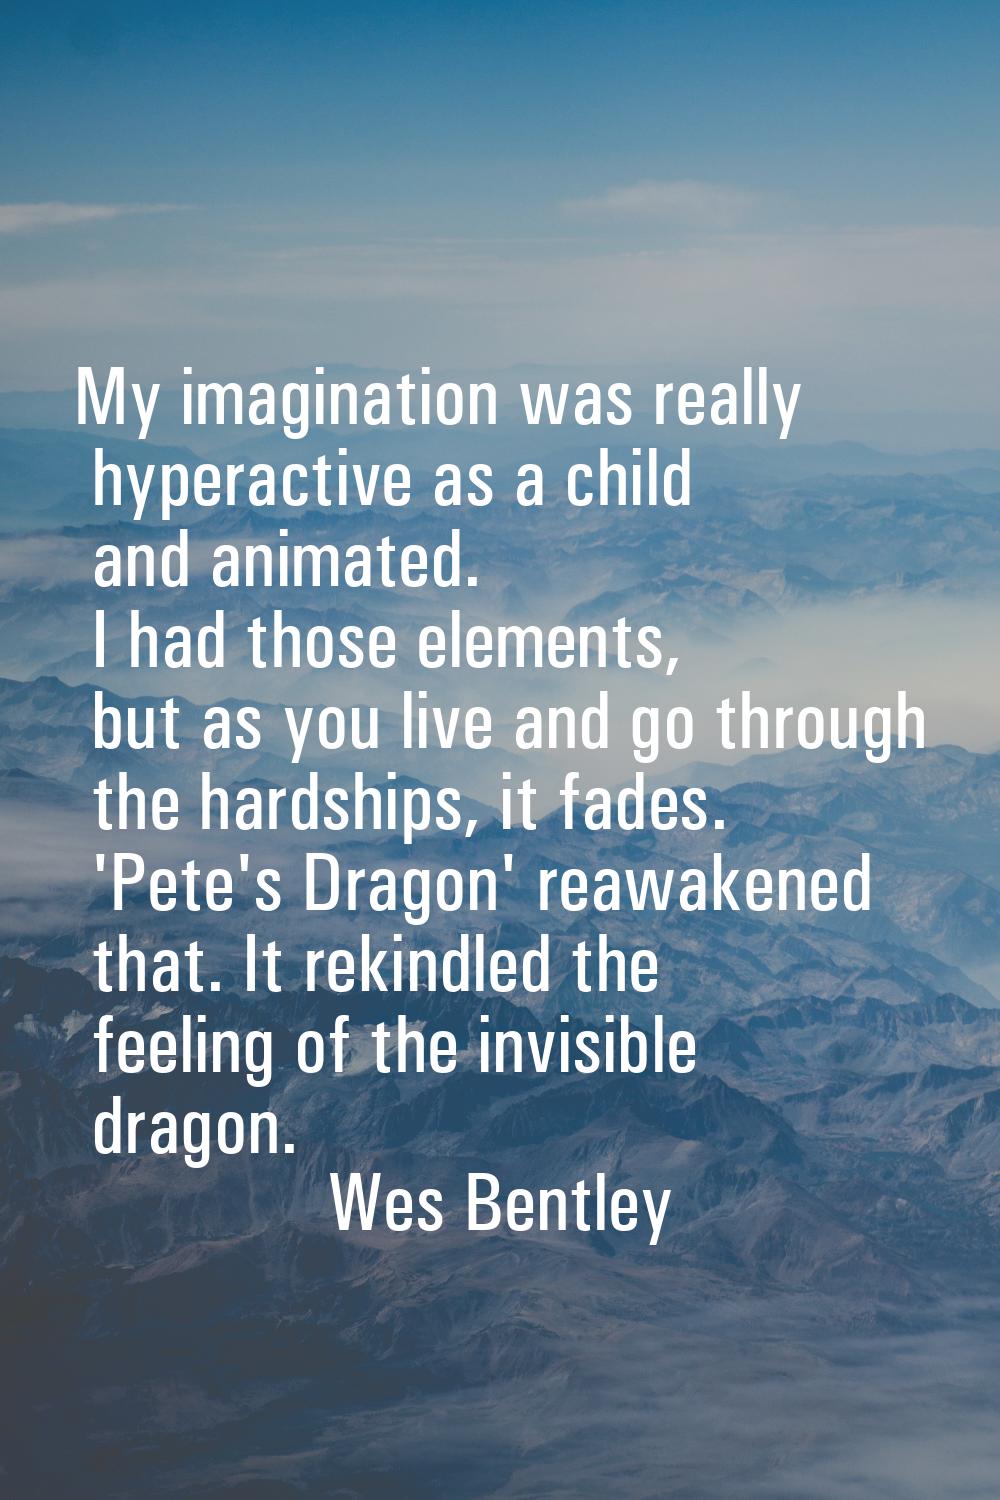 My imagination was really hyperactive as a child and animated. I had those elements, but as you liv